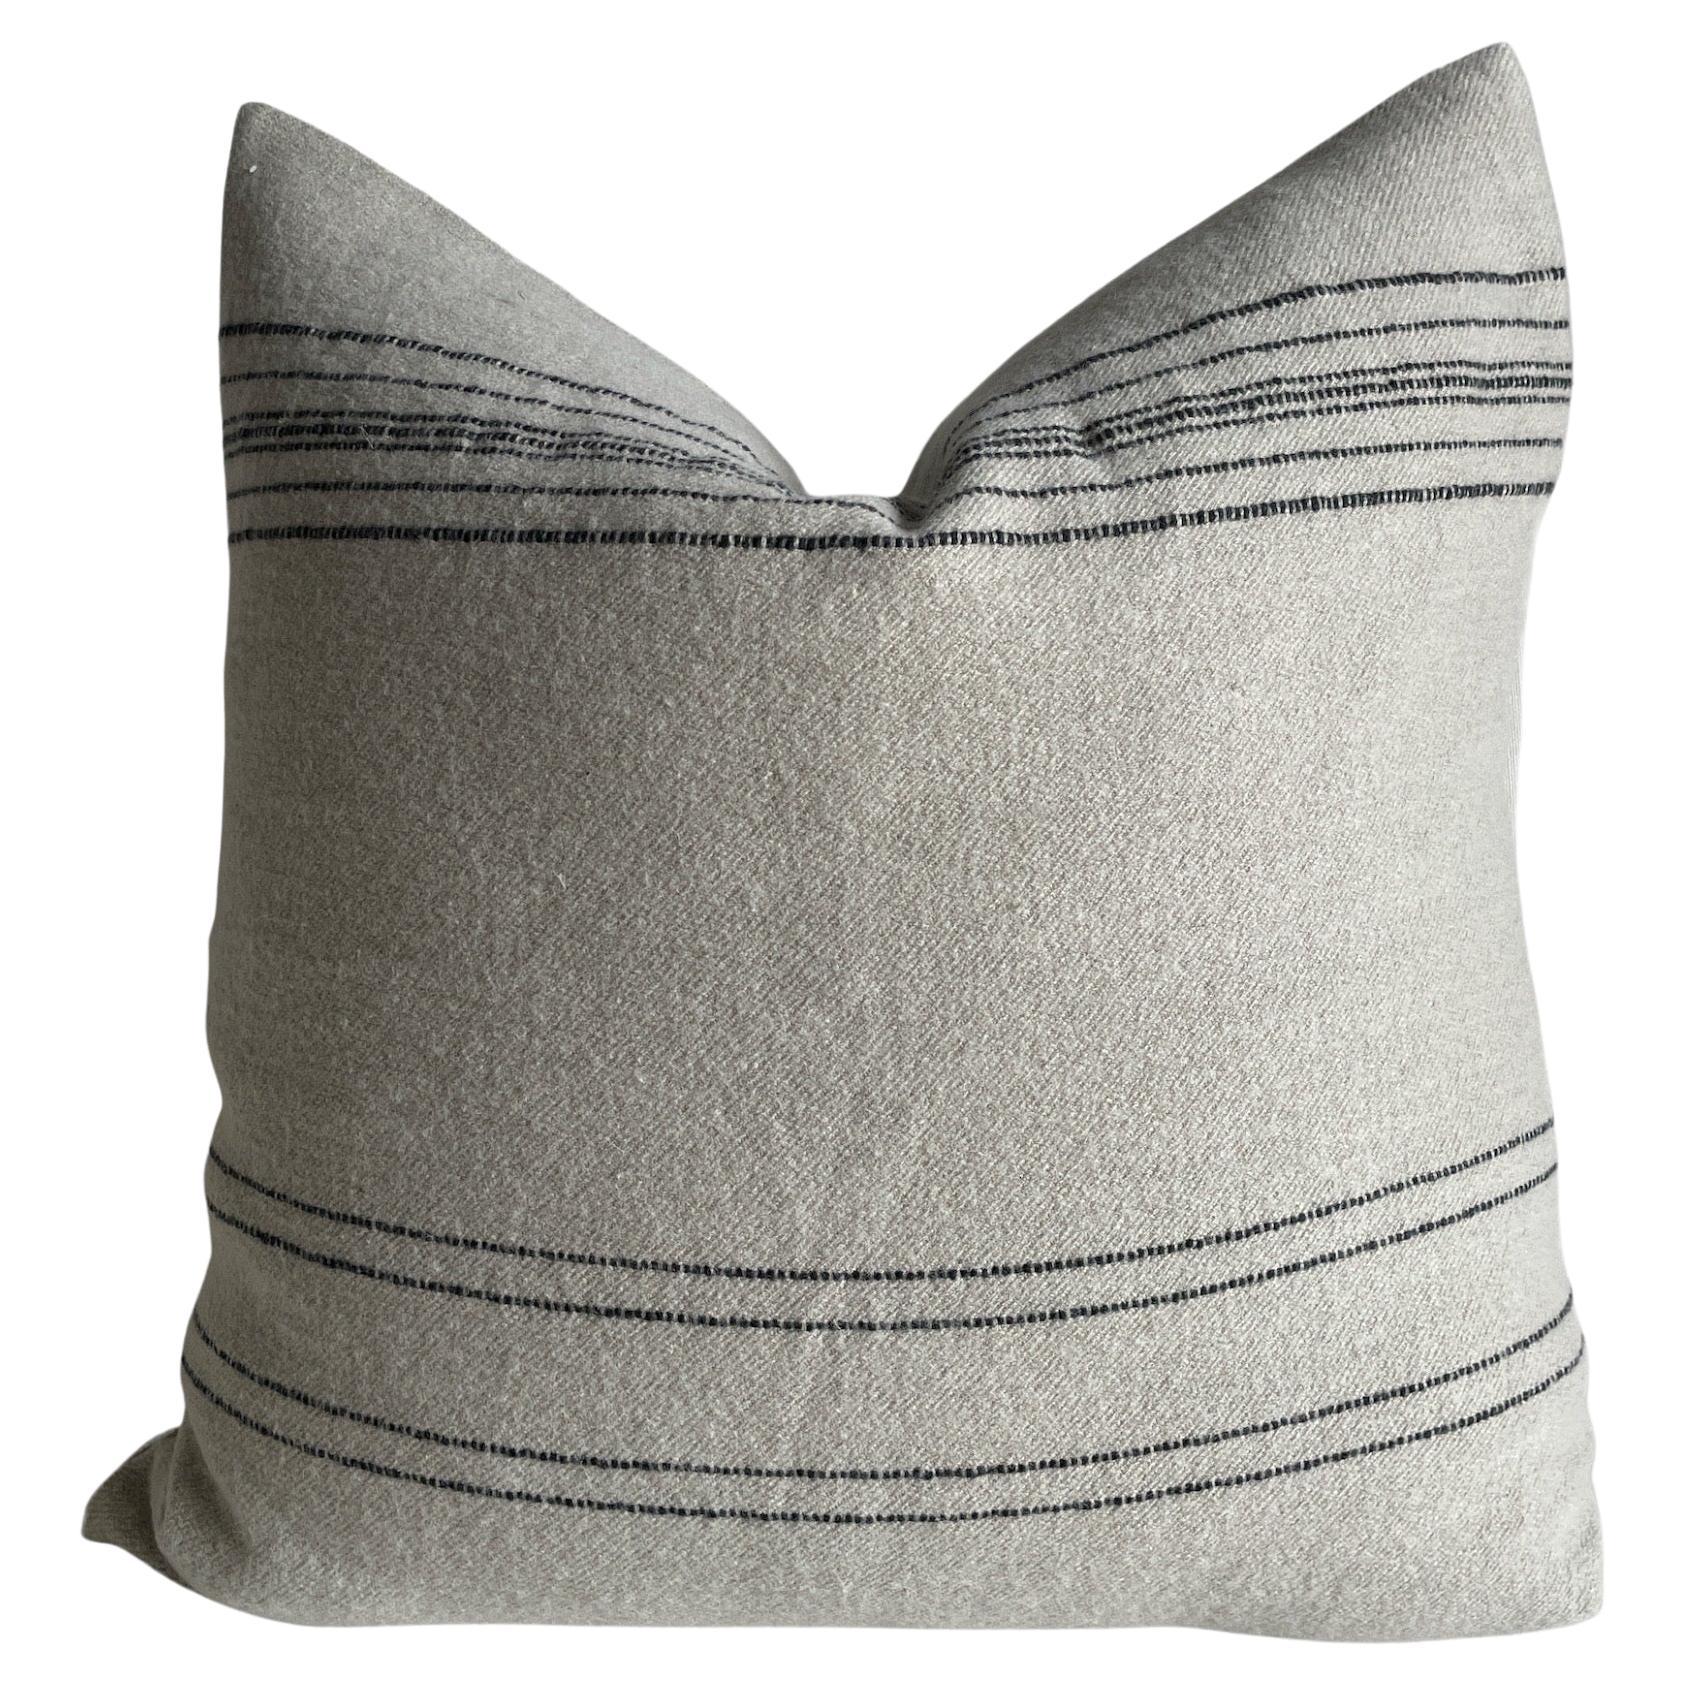 Belgian Linen and Wool Oversize Pillow Cover in Oatmeal and Coal